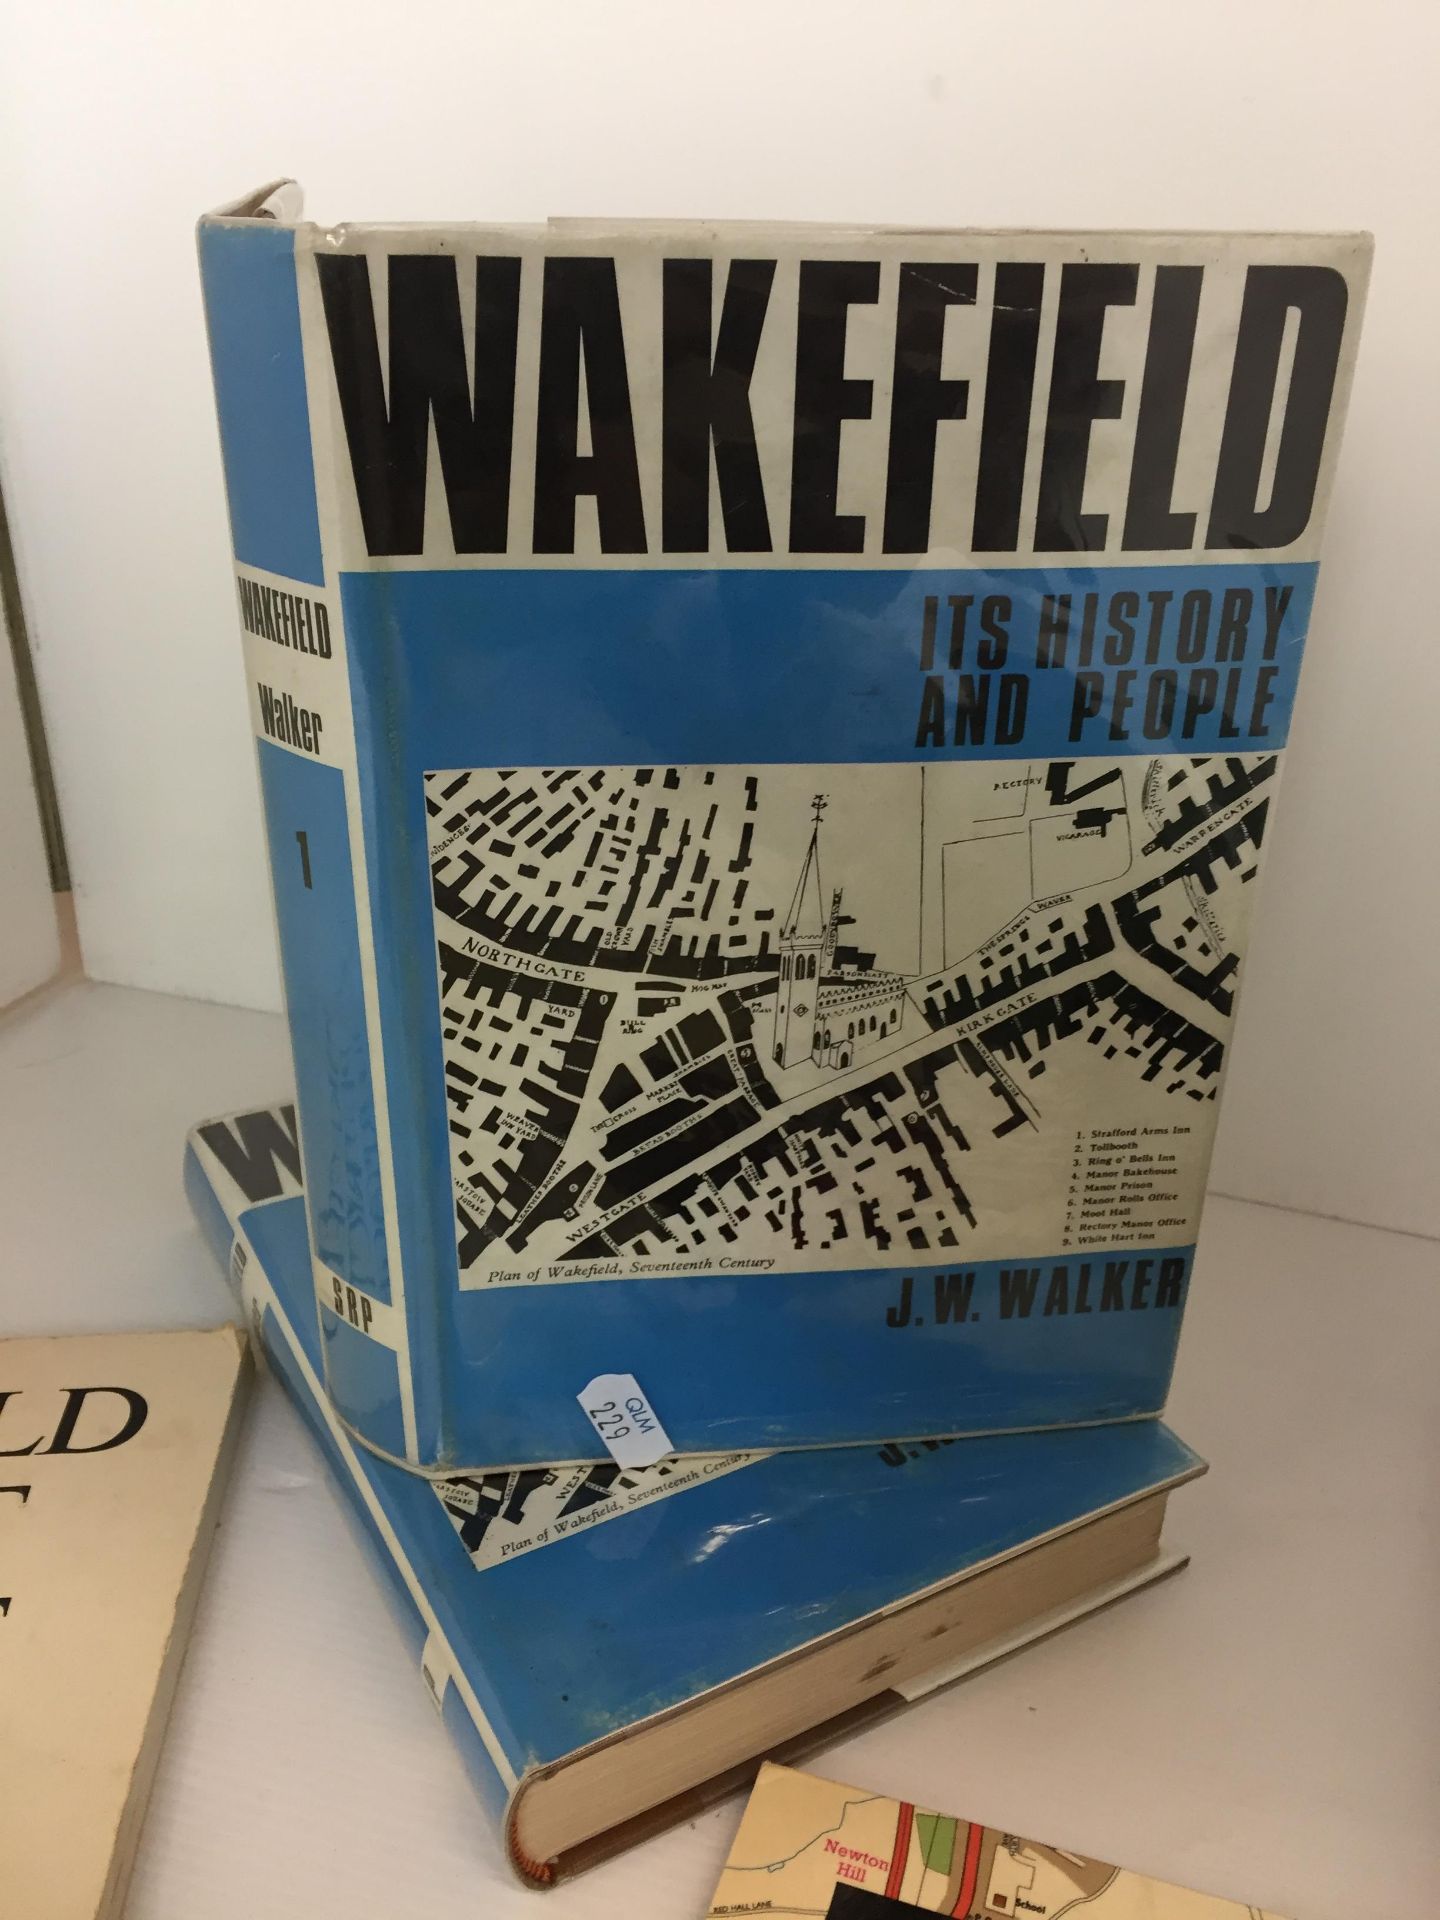 Nine Wakefield related items - volumes 1 and 2 J W Walker Wakefield History and other books, - Image 5 of 5